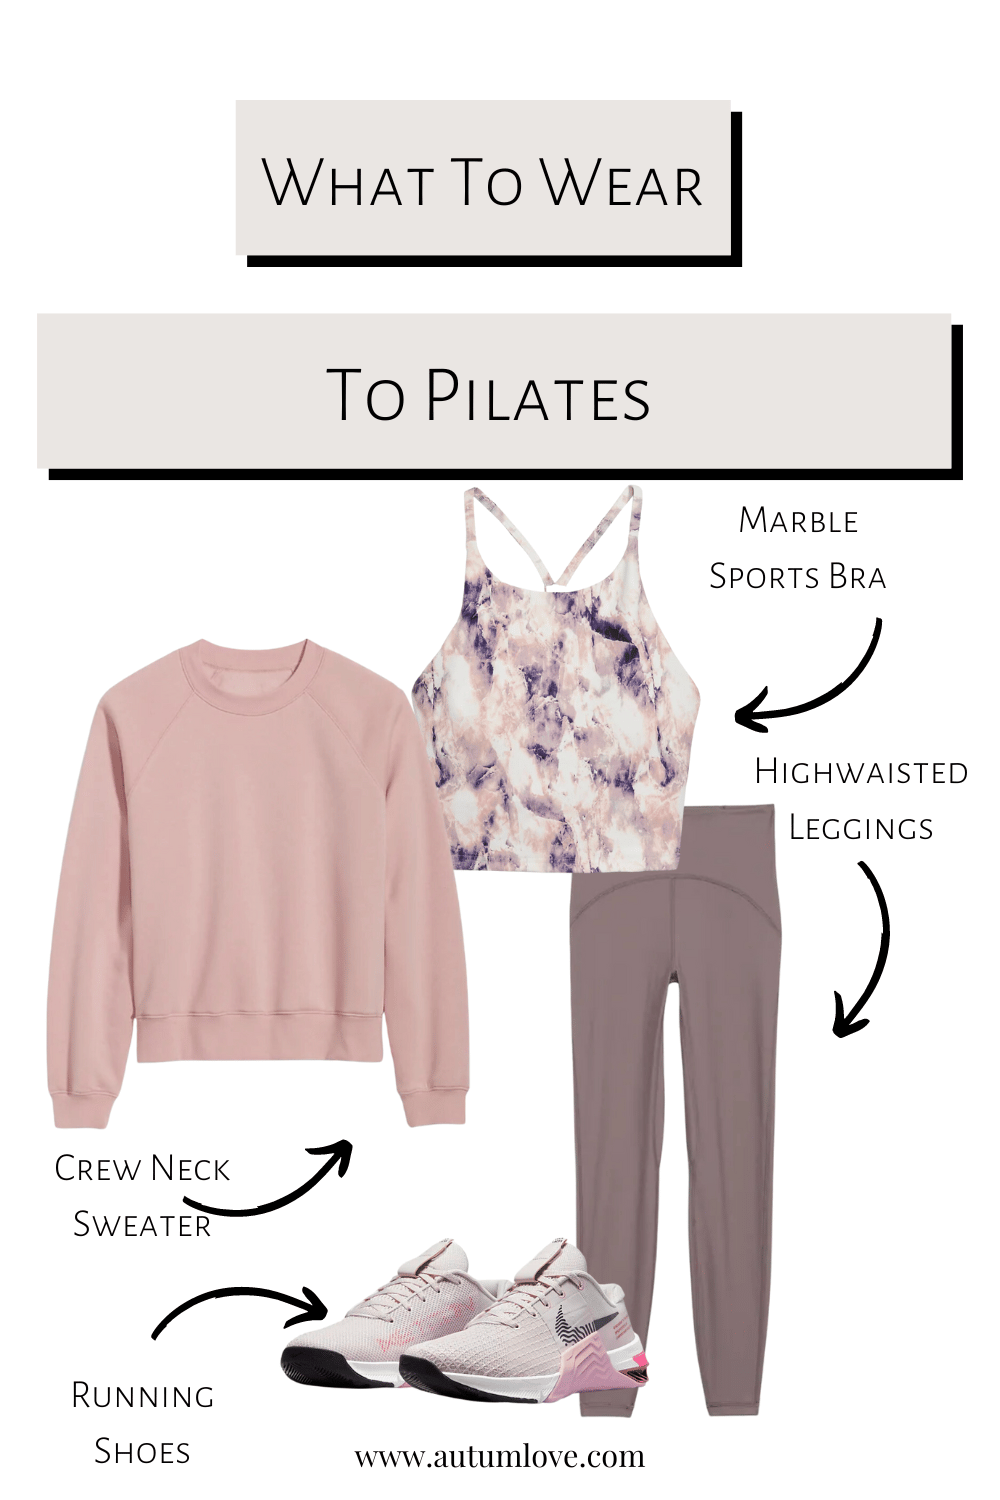 What to wear for Pilates